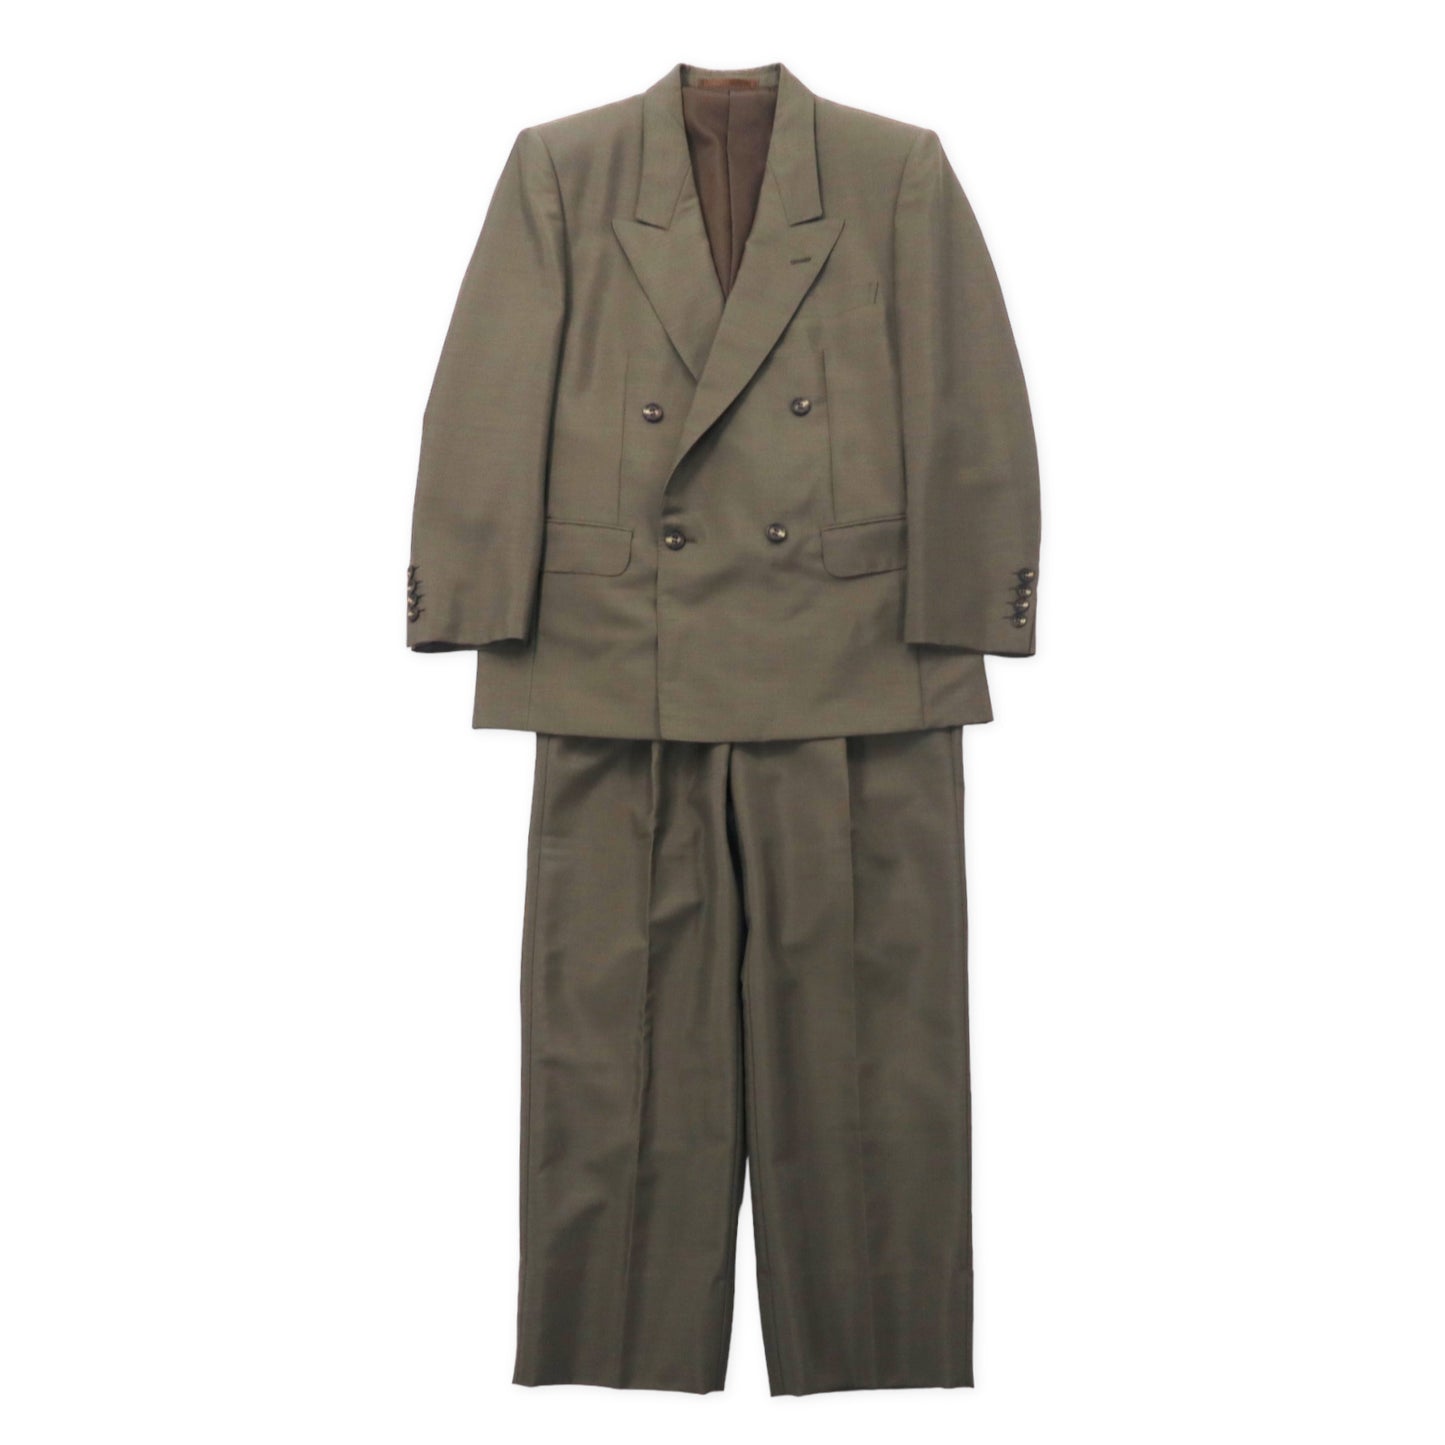 Christian Dior Monsieur Double Suit Setup A-5 170 KhaKI Call Insectic Wool  Max Mixed Vintage Japan Made